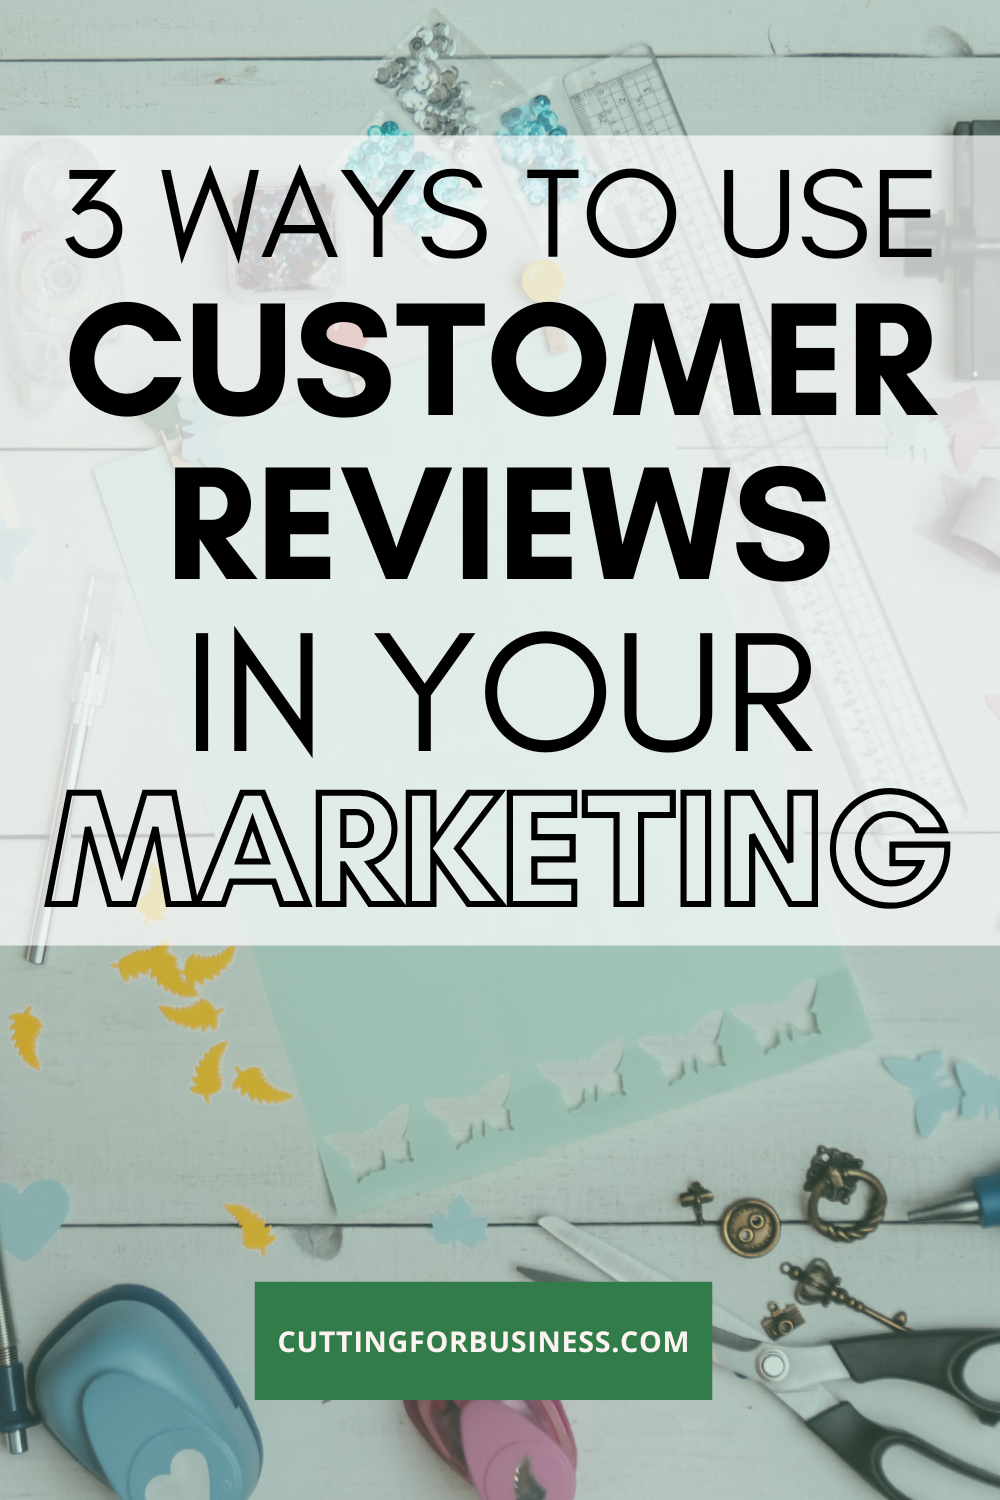 How to Use Customer Reviews in Your Marketing - A great read for craft business owners - cuttingforbusiness.com.